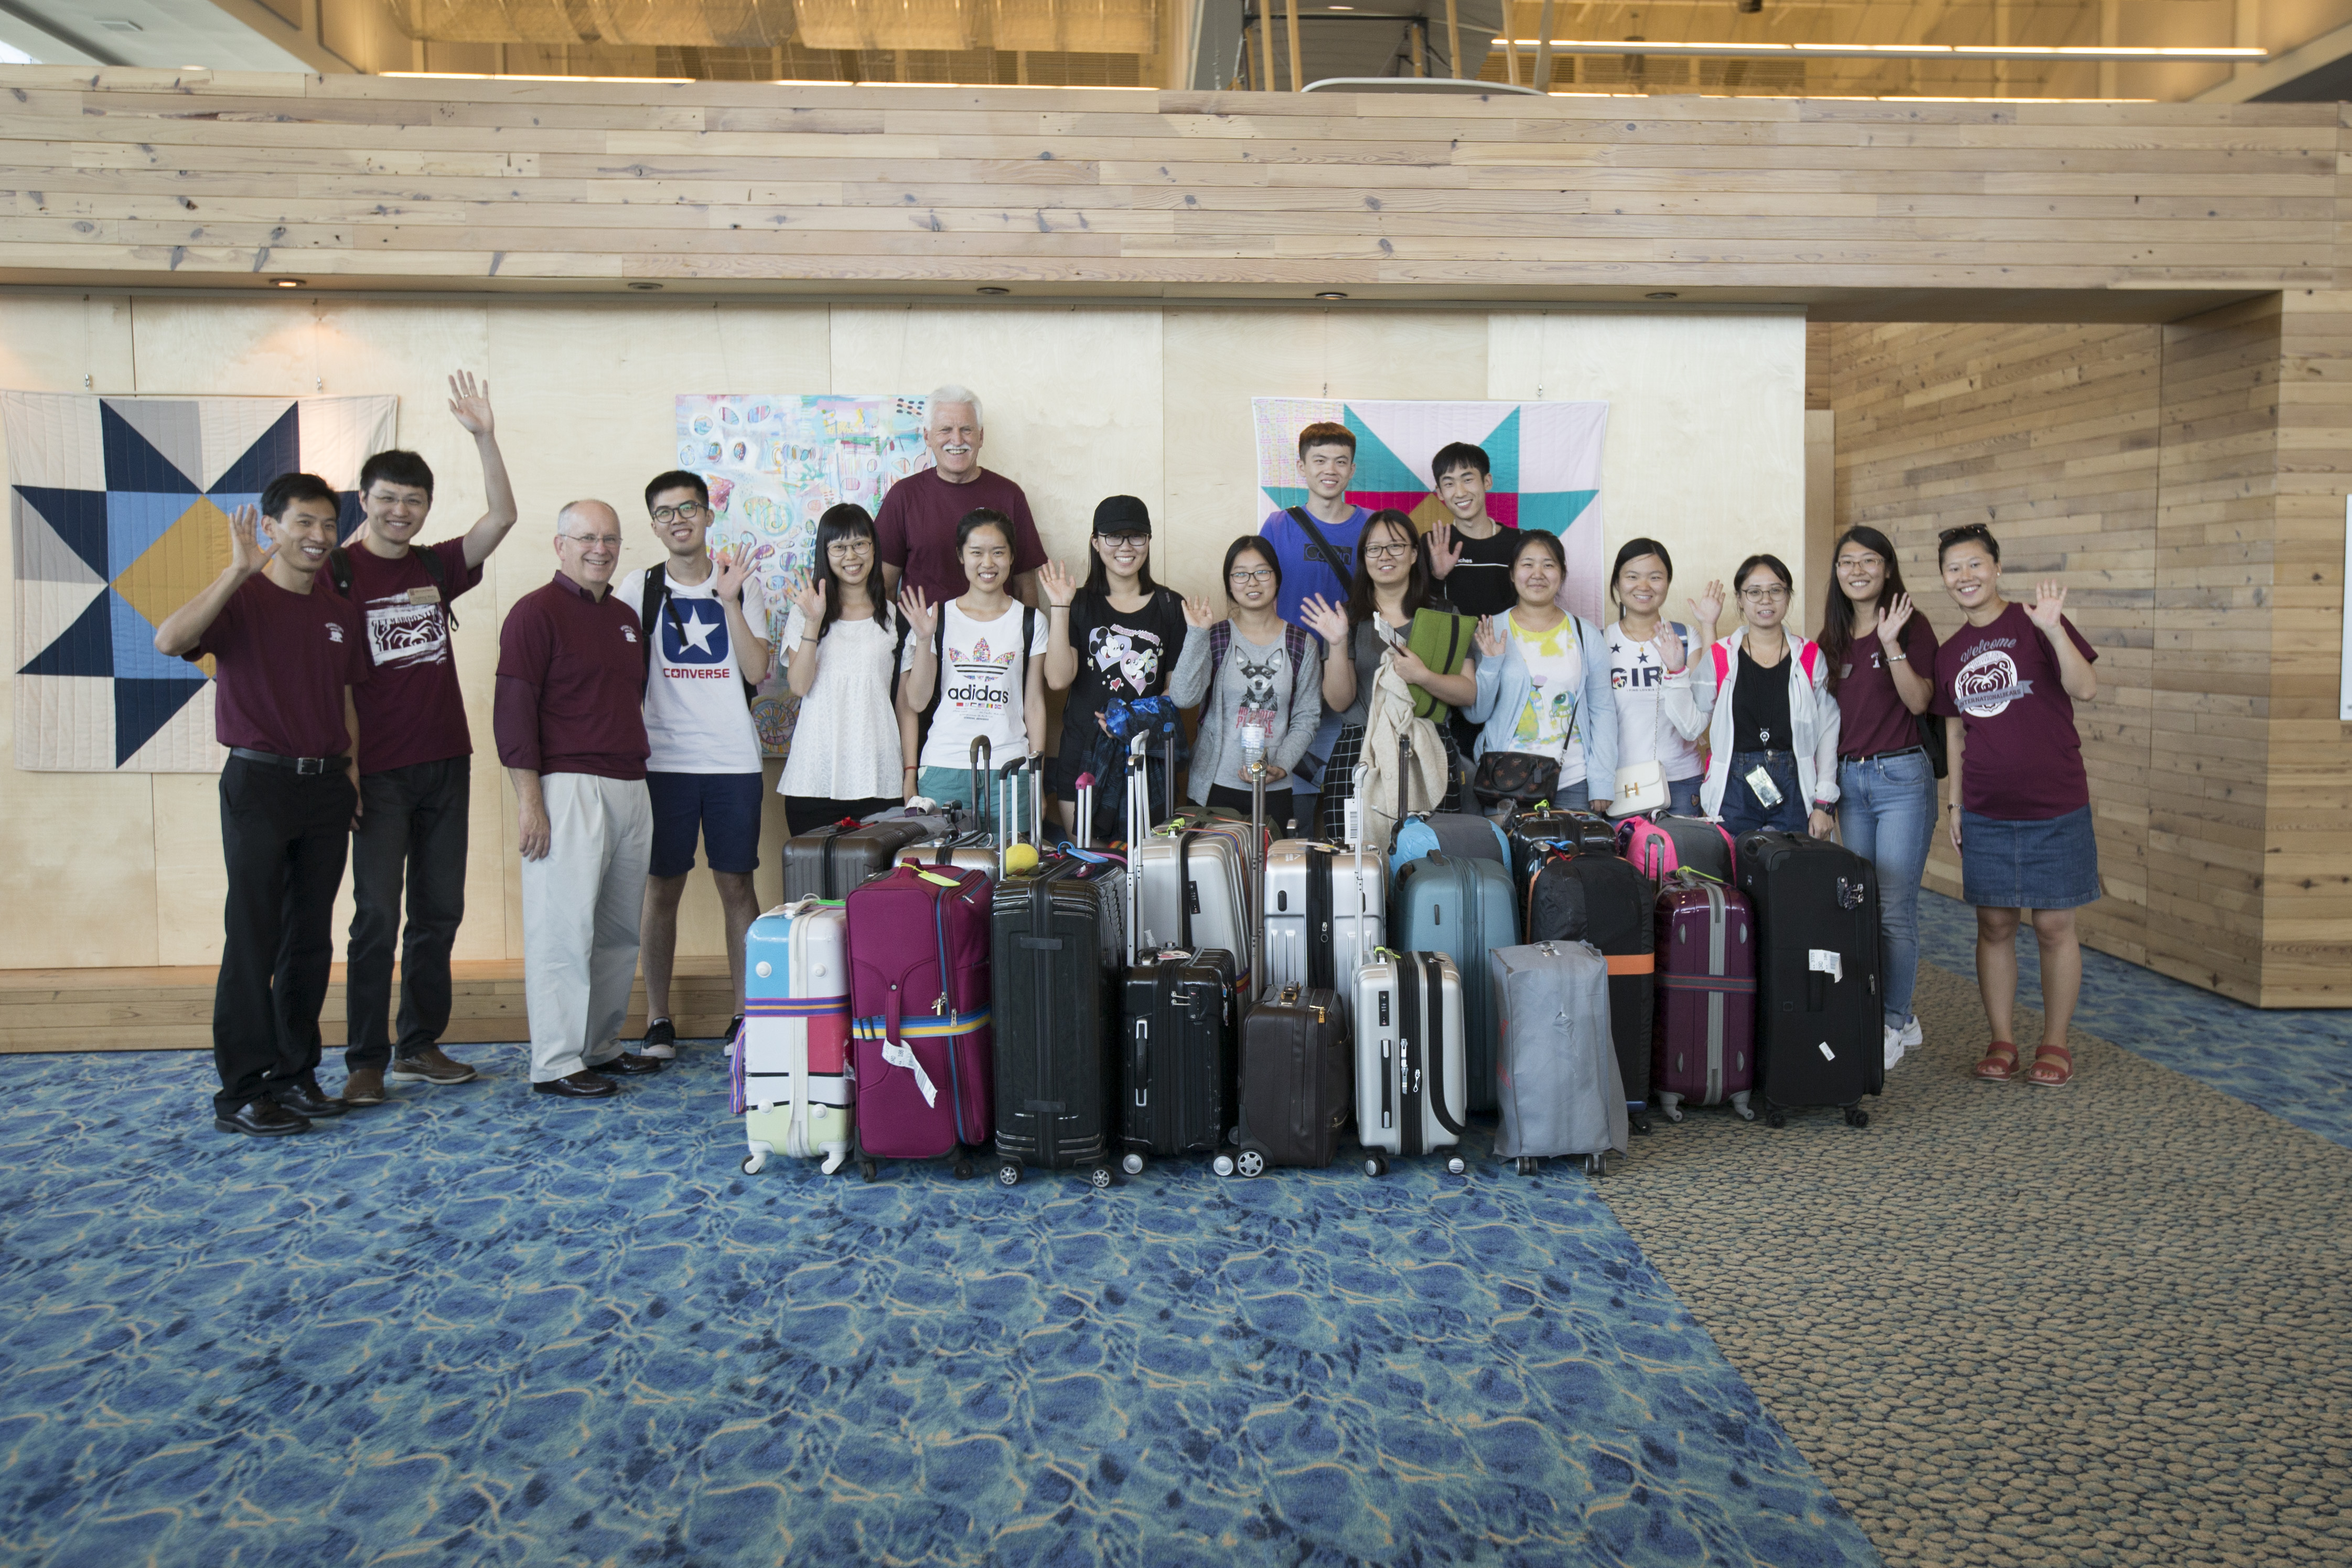 A group of students pose with luggage at the airport